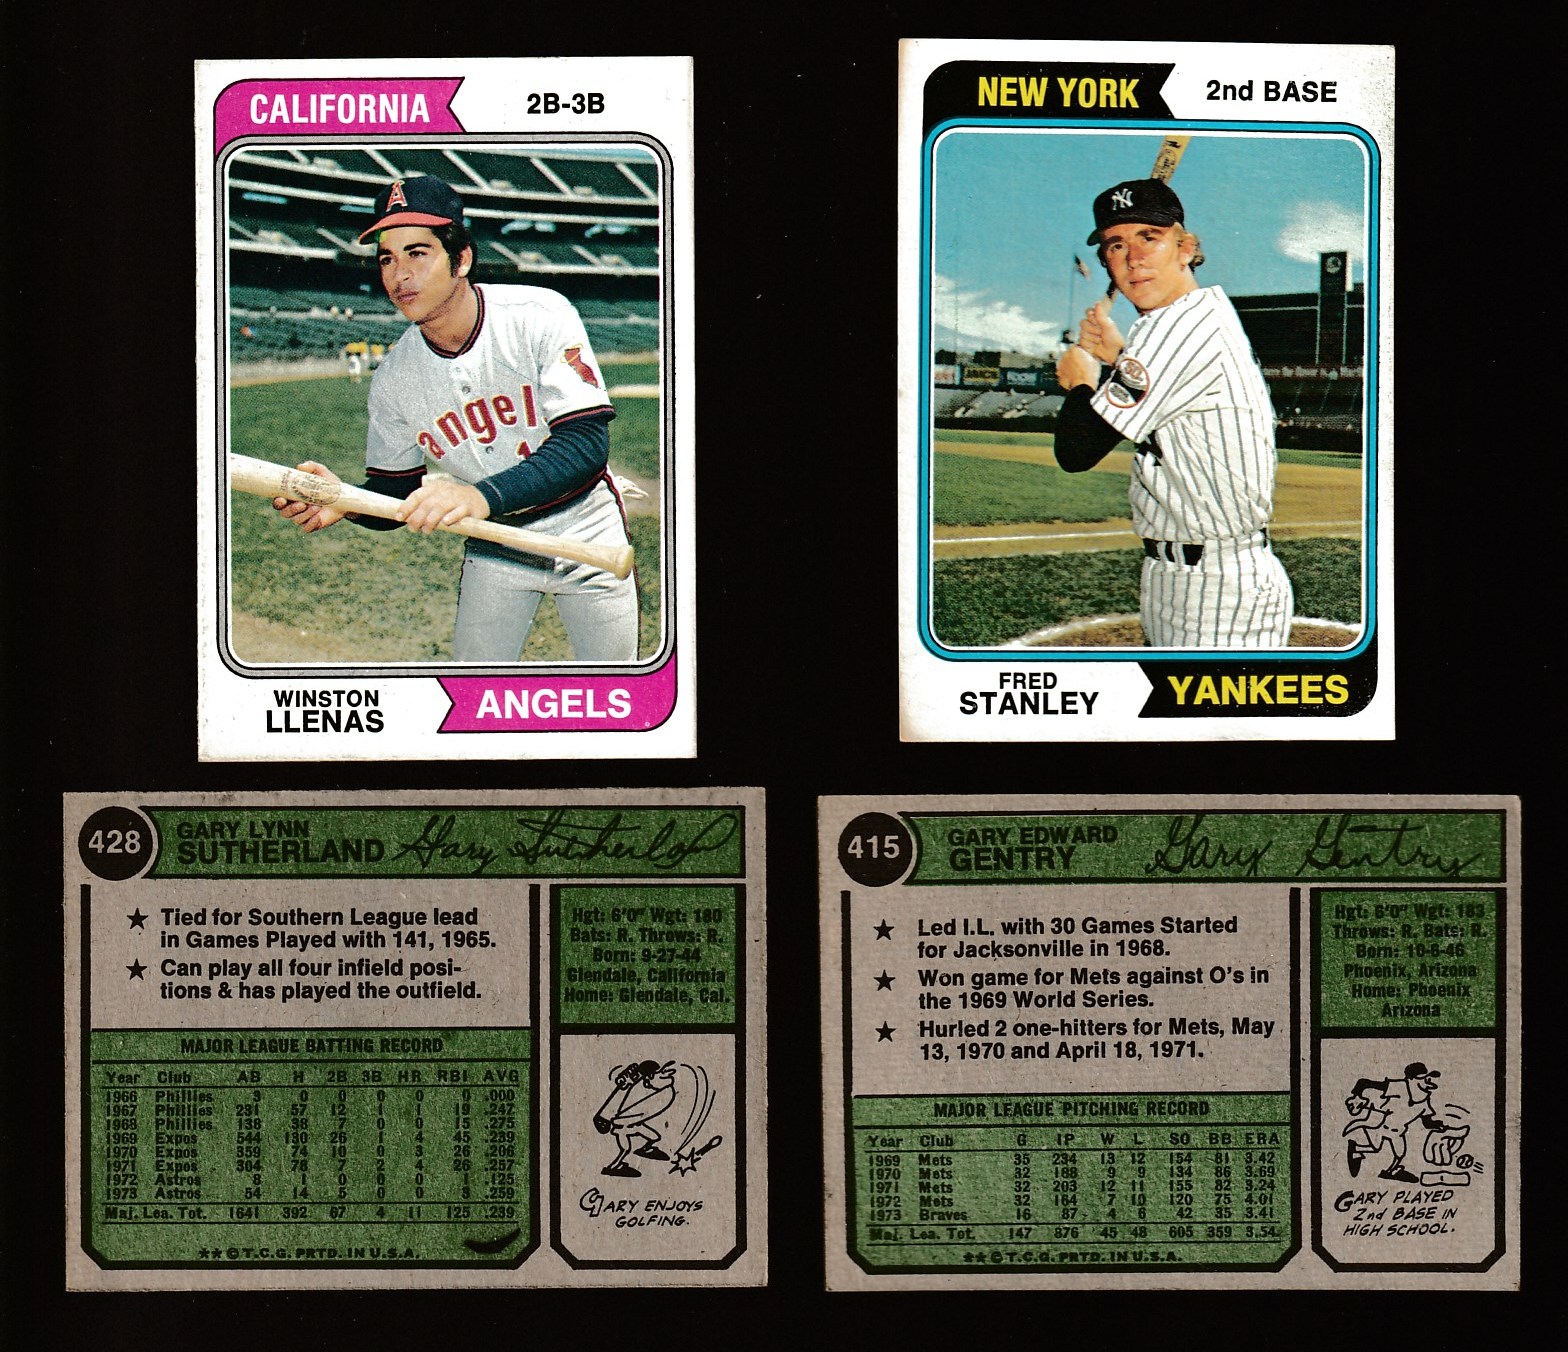 1974 Topps WRONG-BACK #415 Gary Gentry(b)/Fred Stanley(f) (Yankees) Baseball cards value